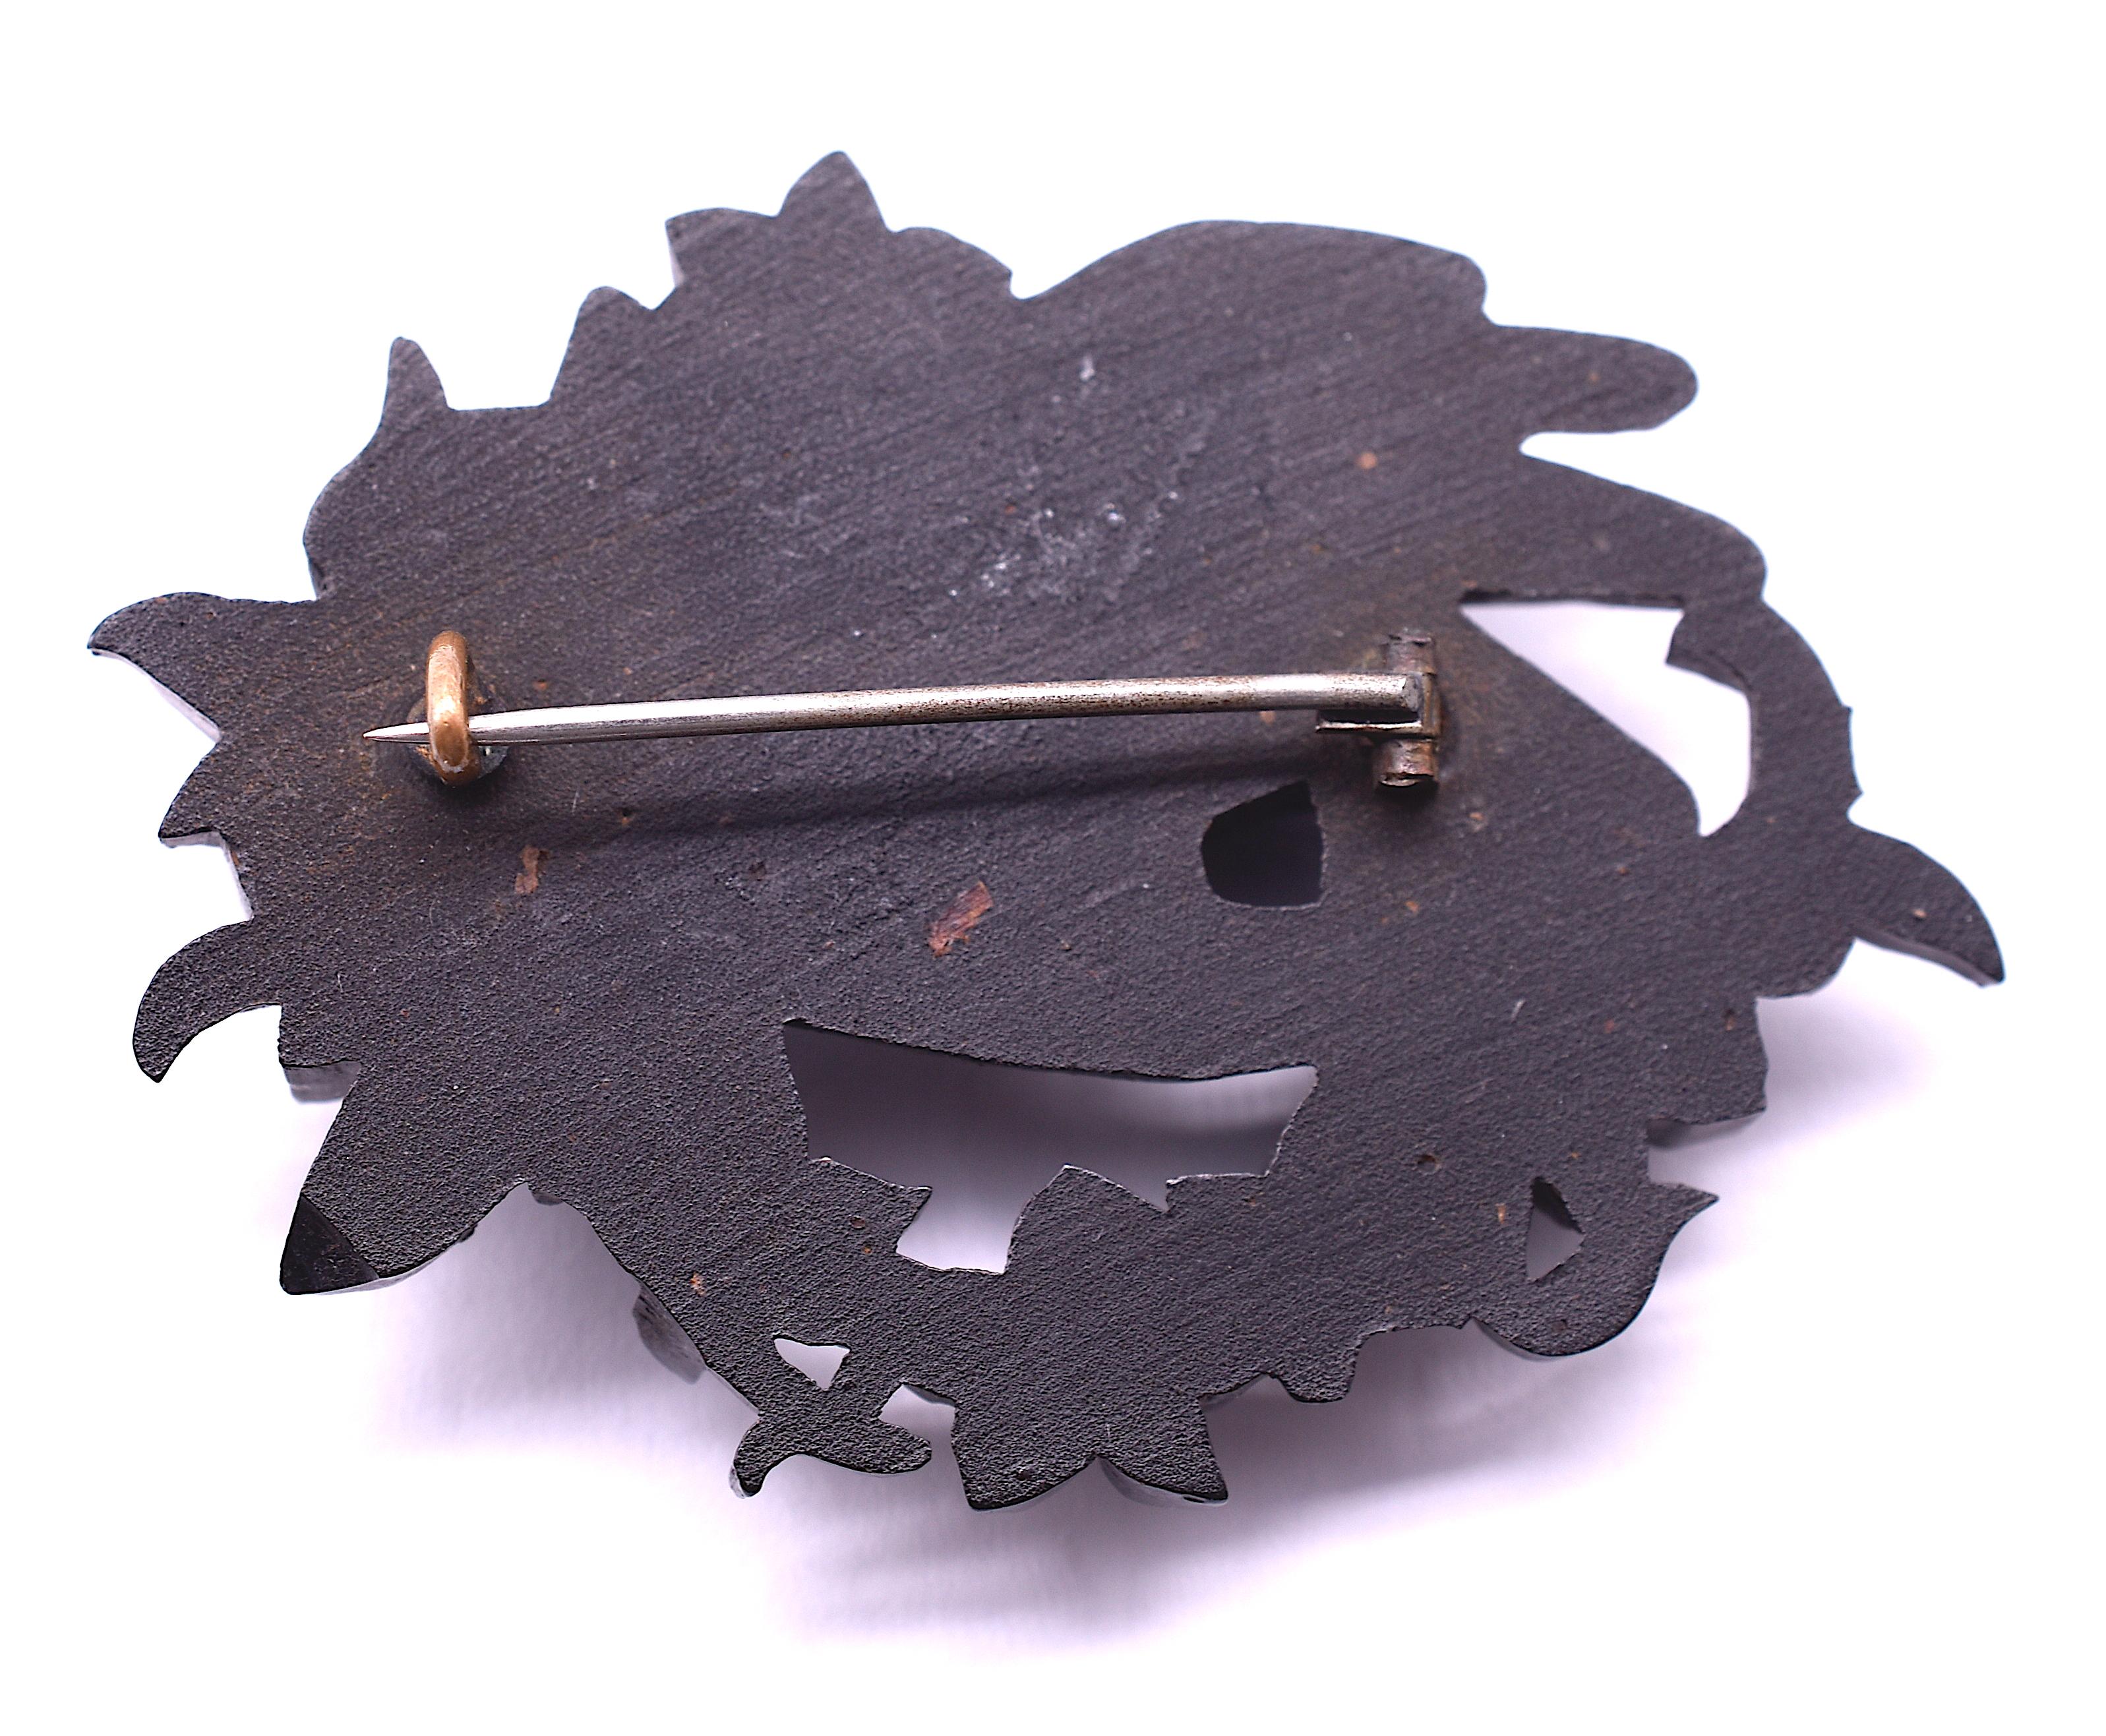 Intricately carved, our hand- carved hand brooch is made up of a material called Bog Oak. Bog Oak is a type of peat that is native to Ireland; the Irish are quite proud of their bog oak jewelry. It resembles wood and has slight graining, usually